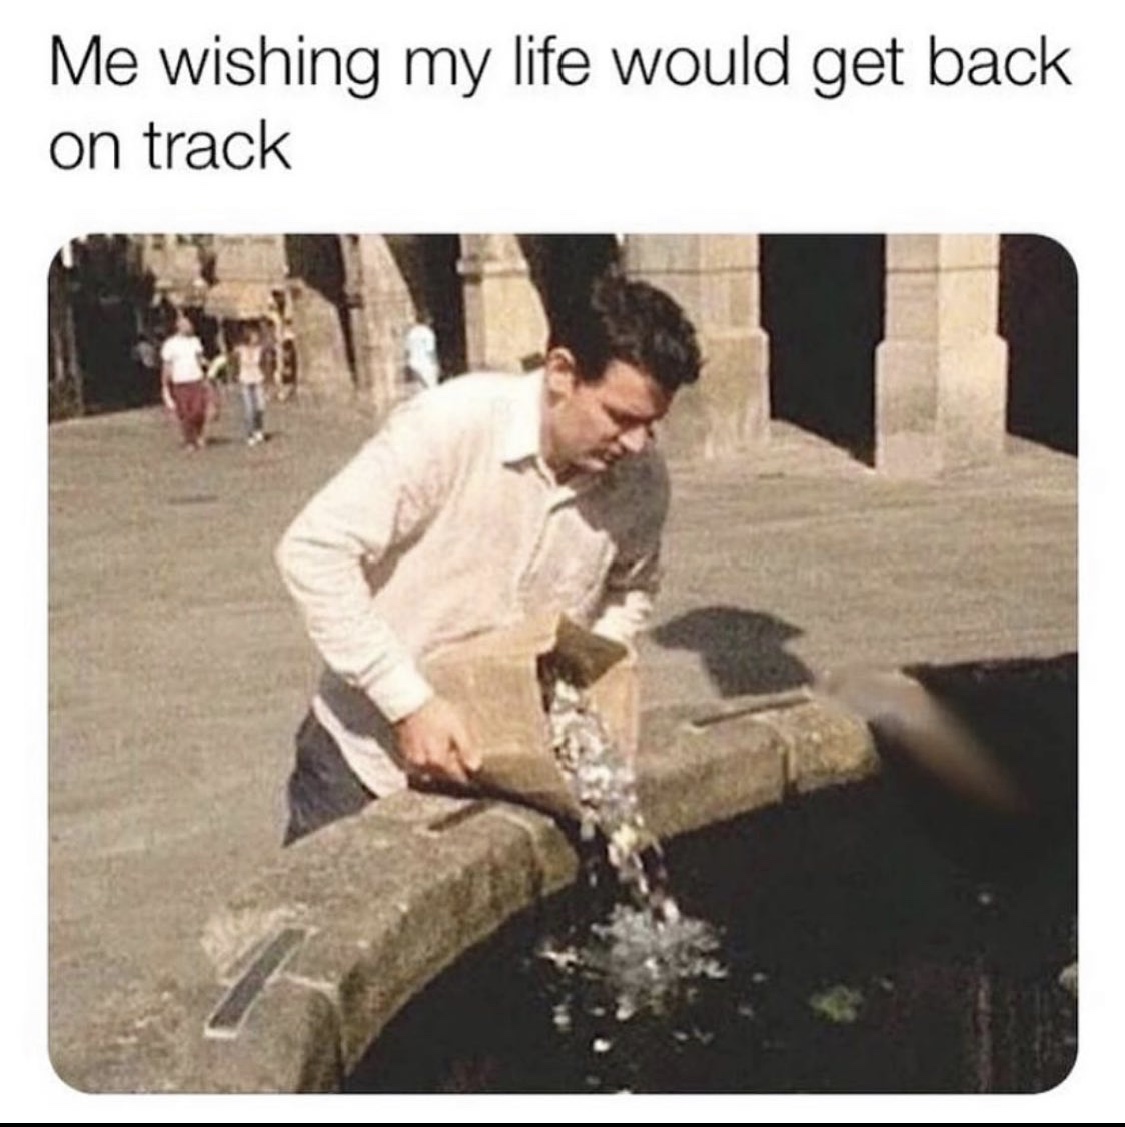 best memes today - Me wishing my life would get back on track